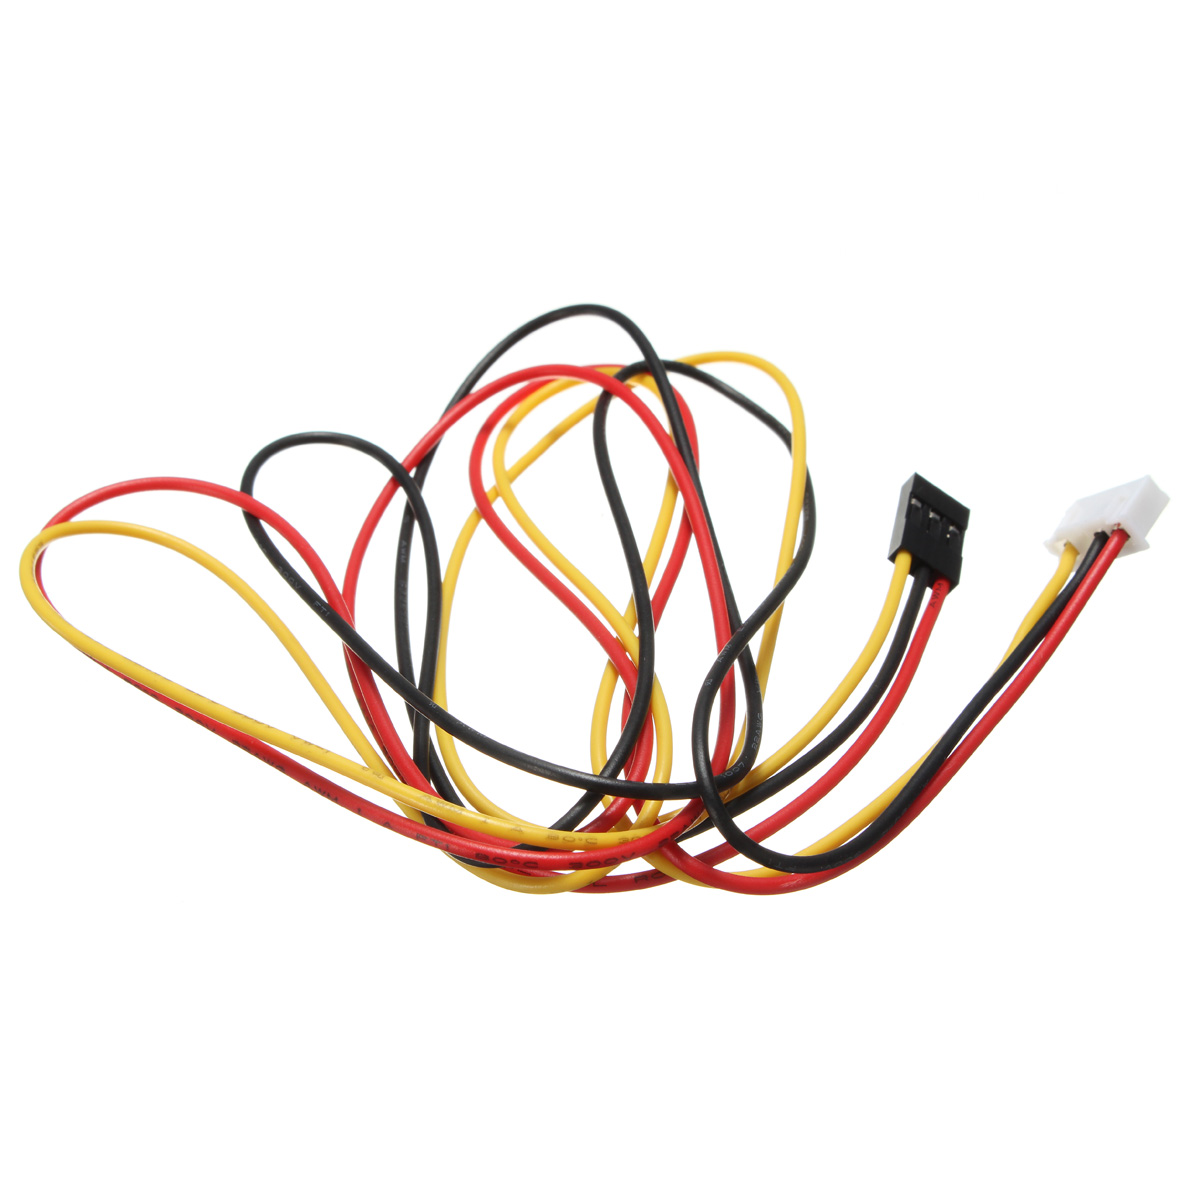 RAMPS 1.4 Endstop Switch For RepRap Mendel 3D Printer With 70cm Cable 11